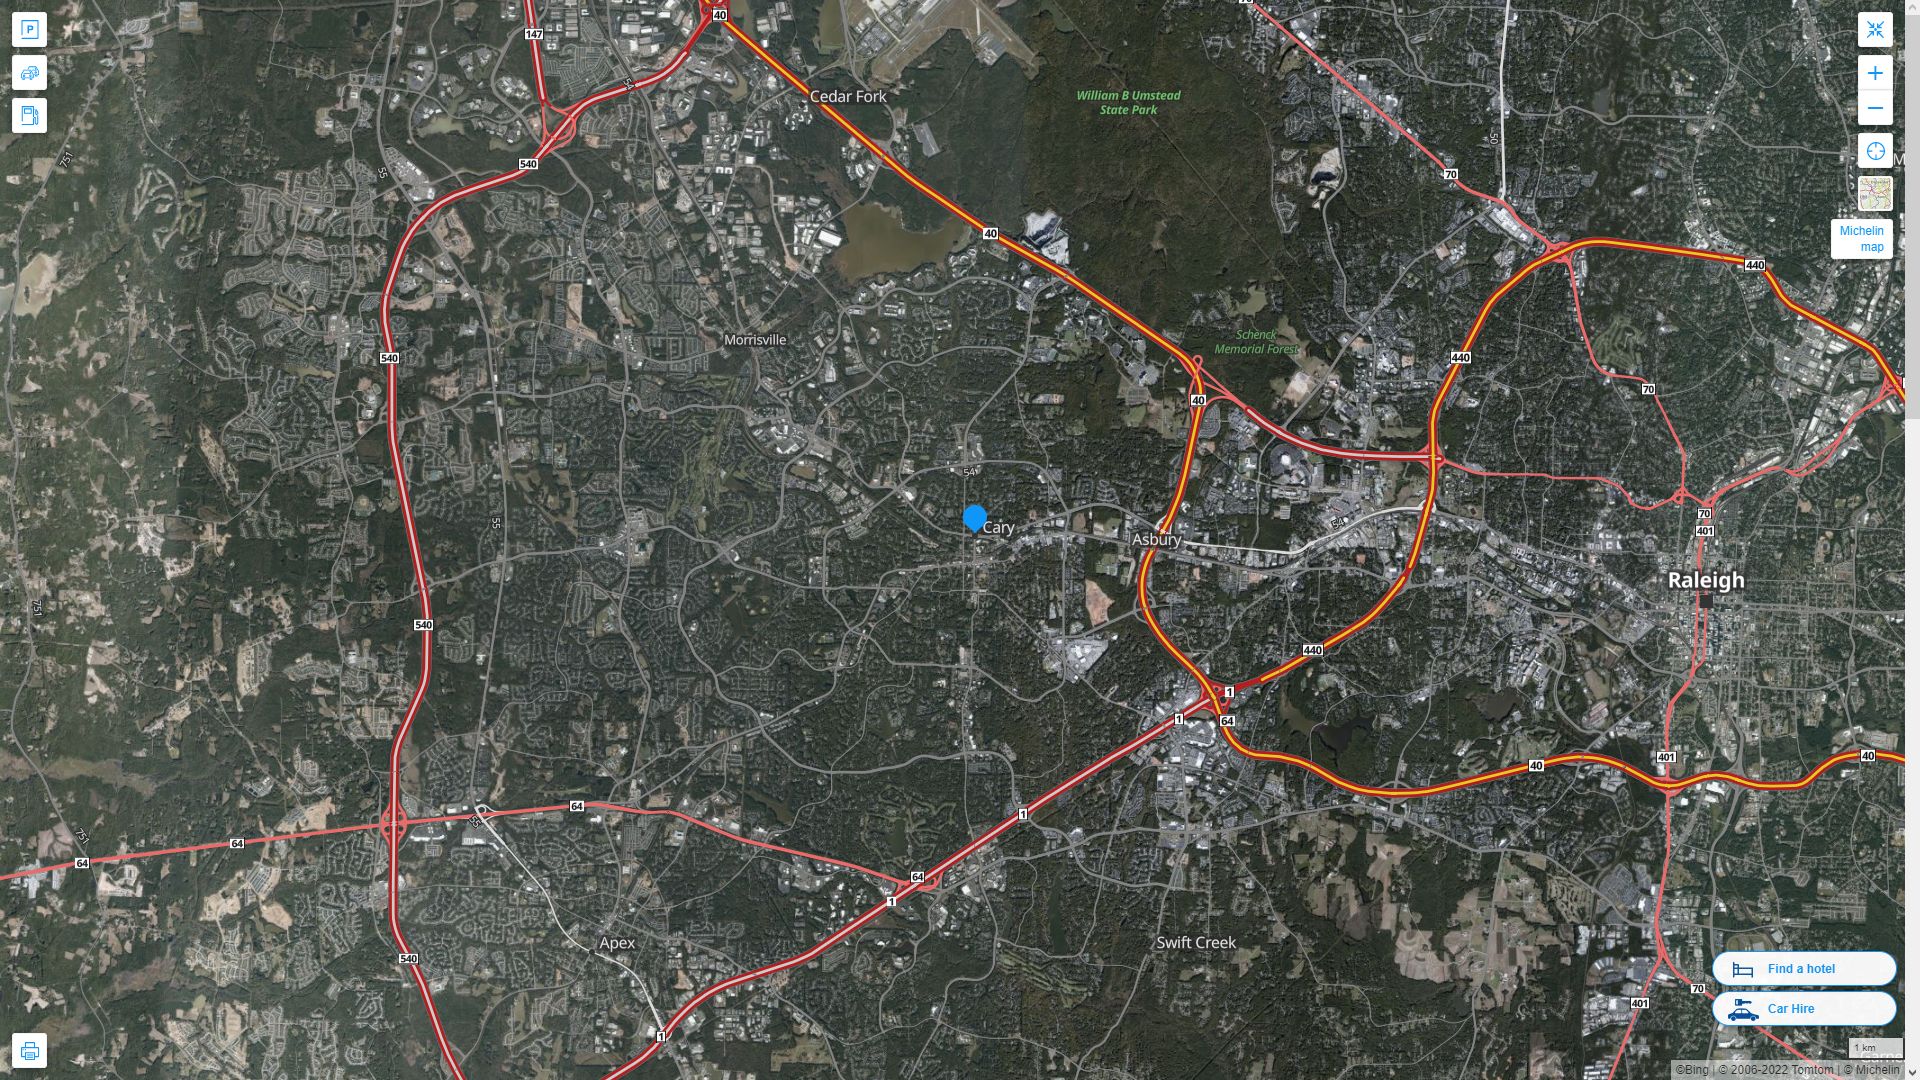 Cary North Carolina Highway and Road Map with Satellite View